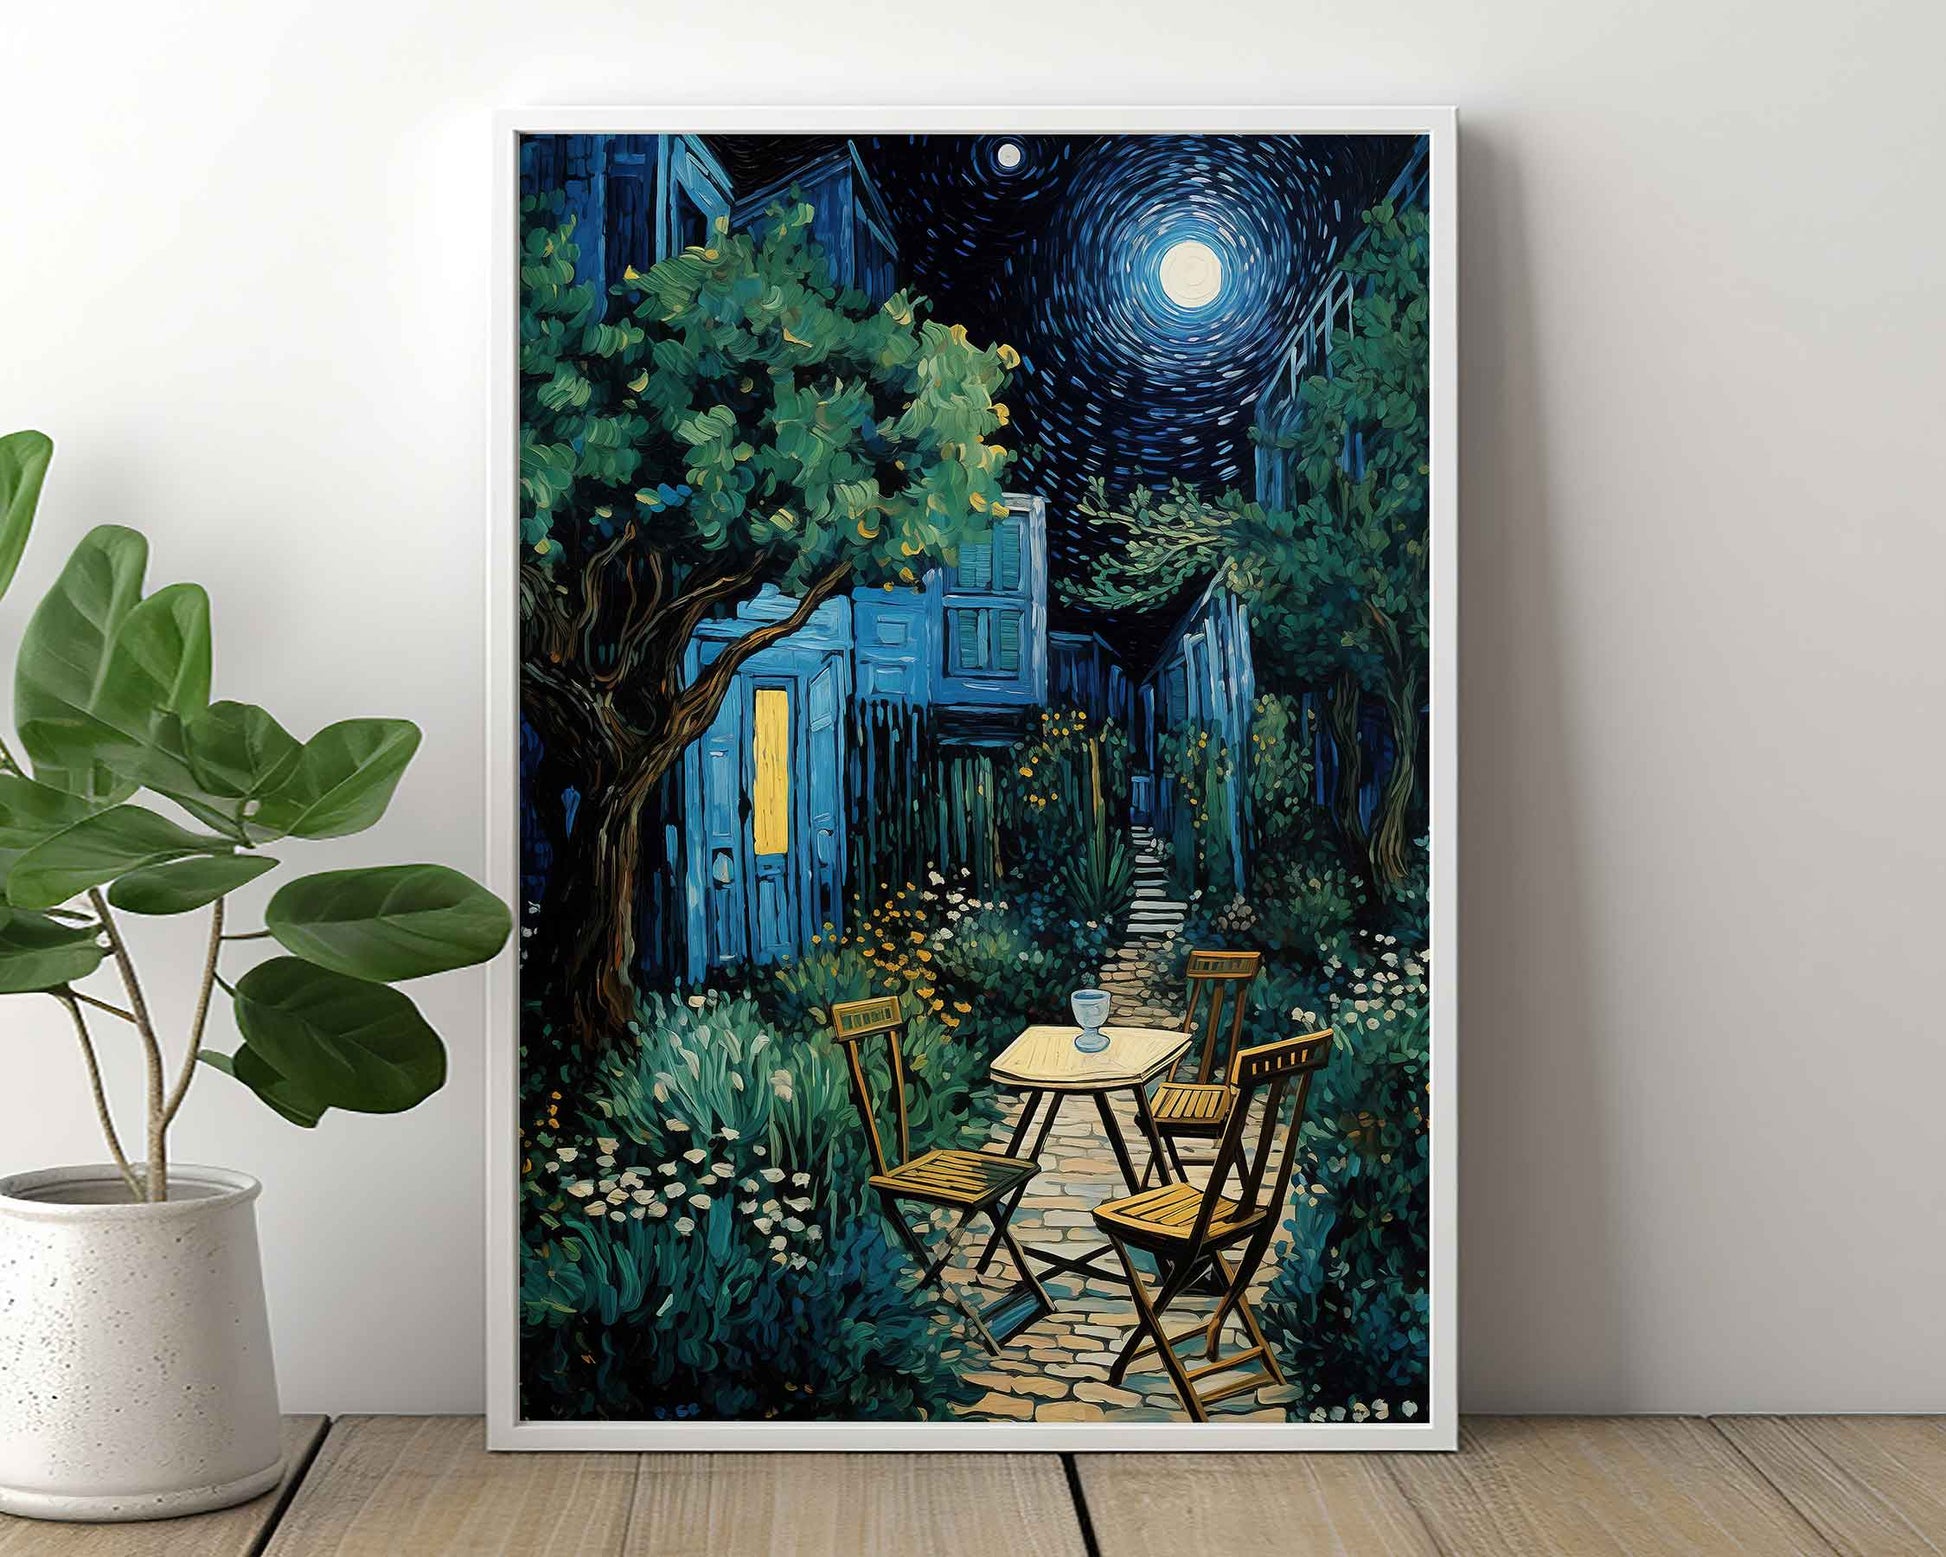 Framed Image of Van Gogh Style Starry Night in Garden Wall Art Print Poster